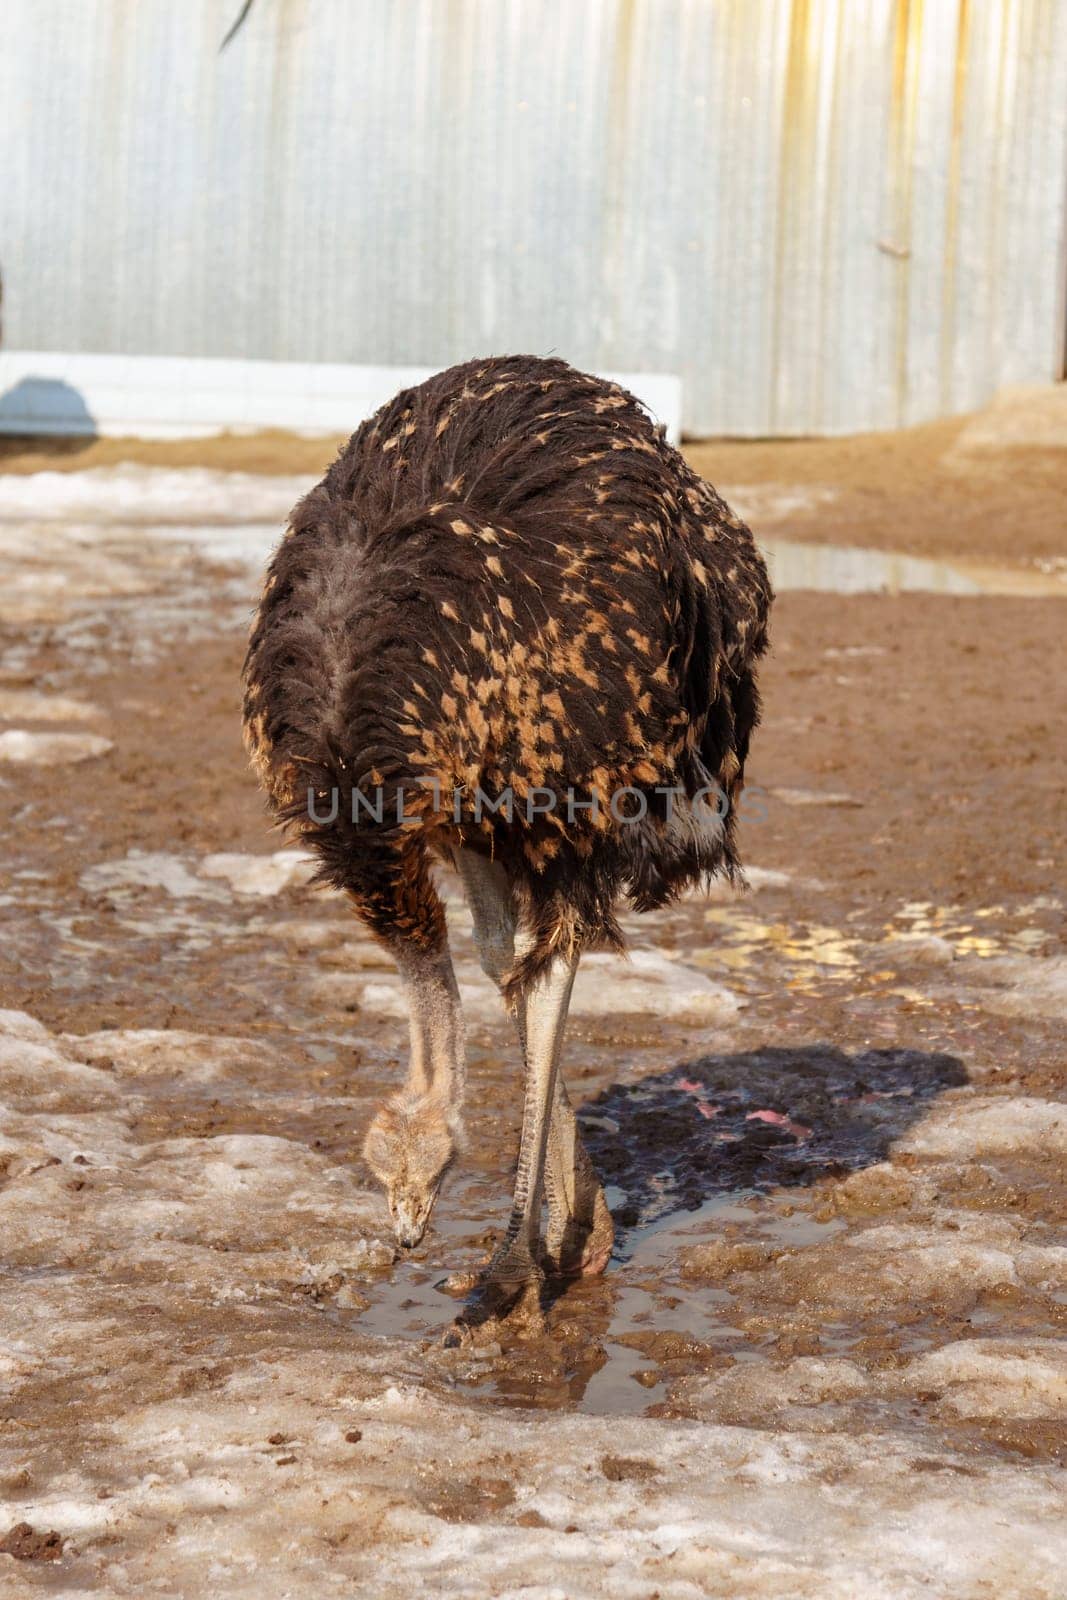 Ostrich stands in the dirt near a fence on an ostrich farm, observing its surroundings. Vertical photo by darksoul72